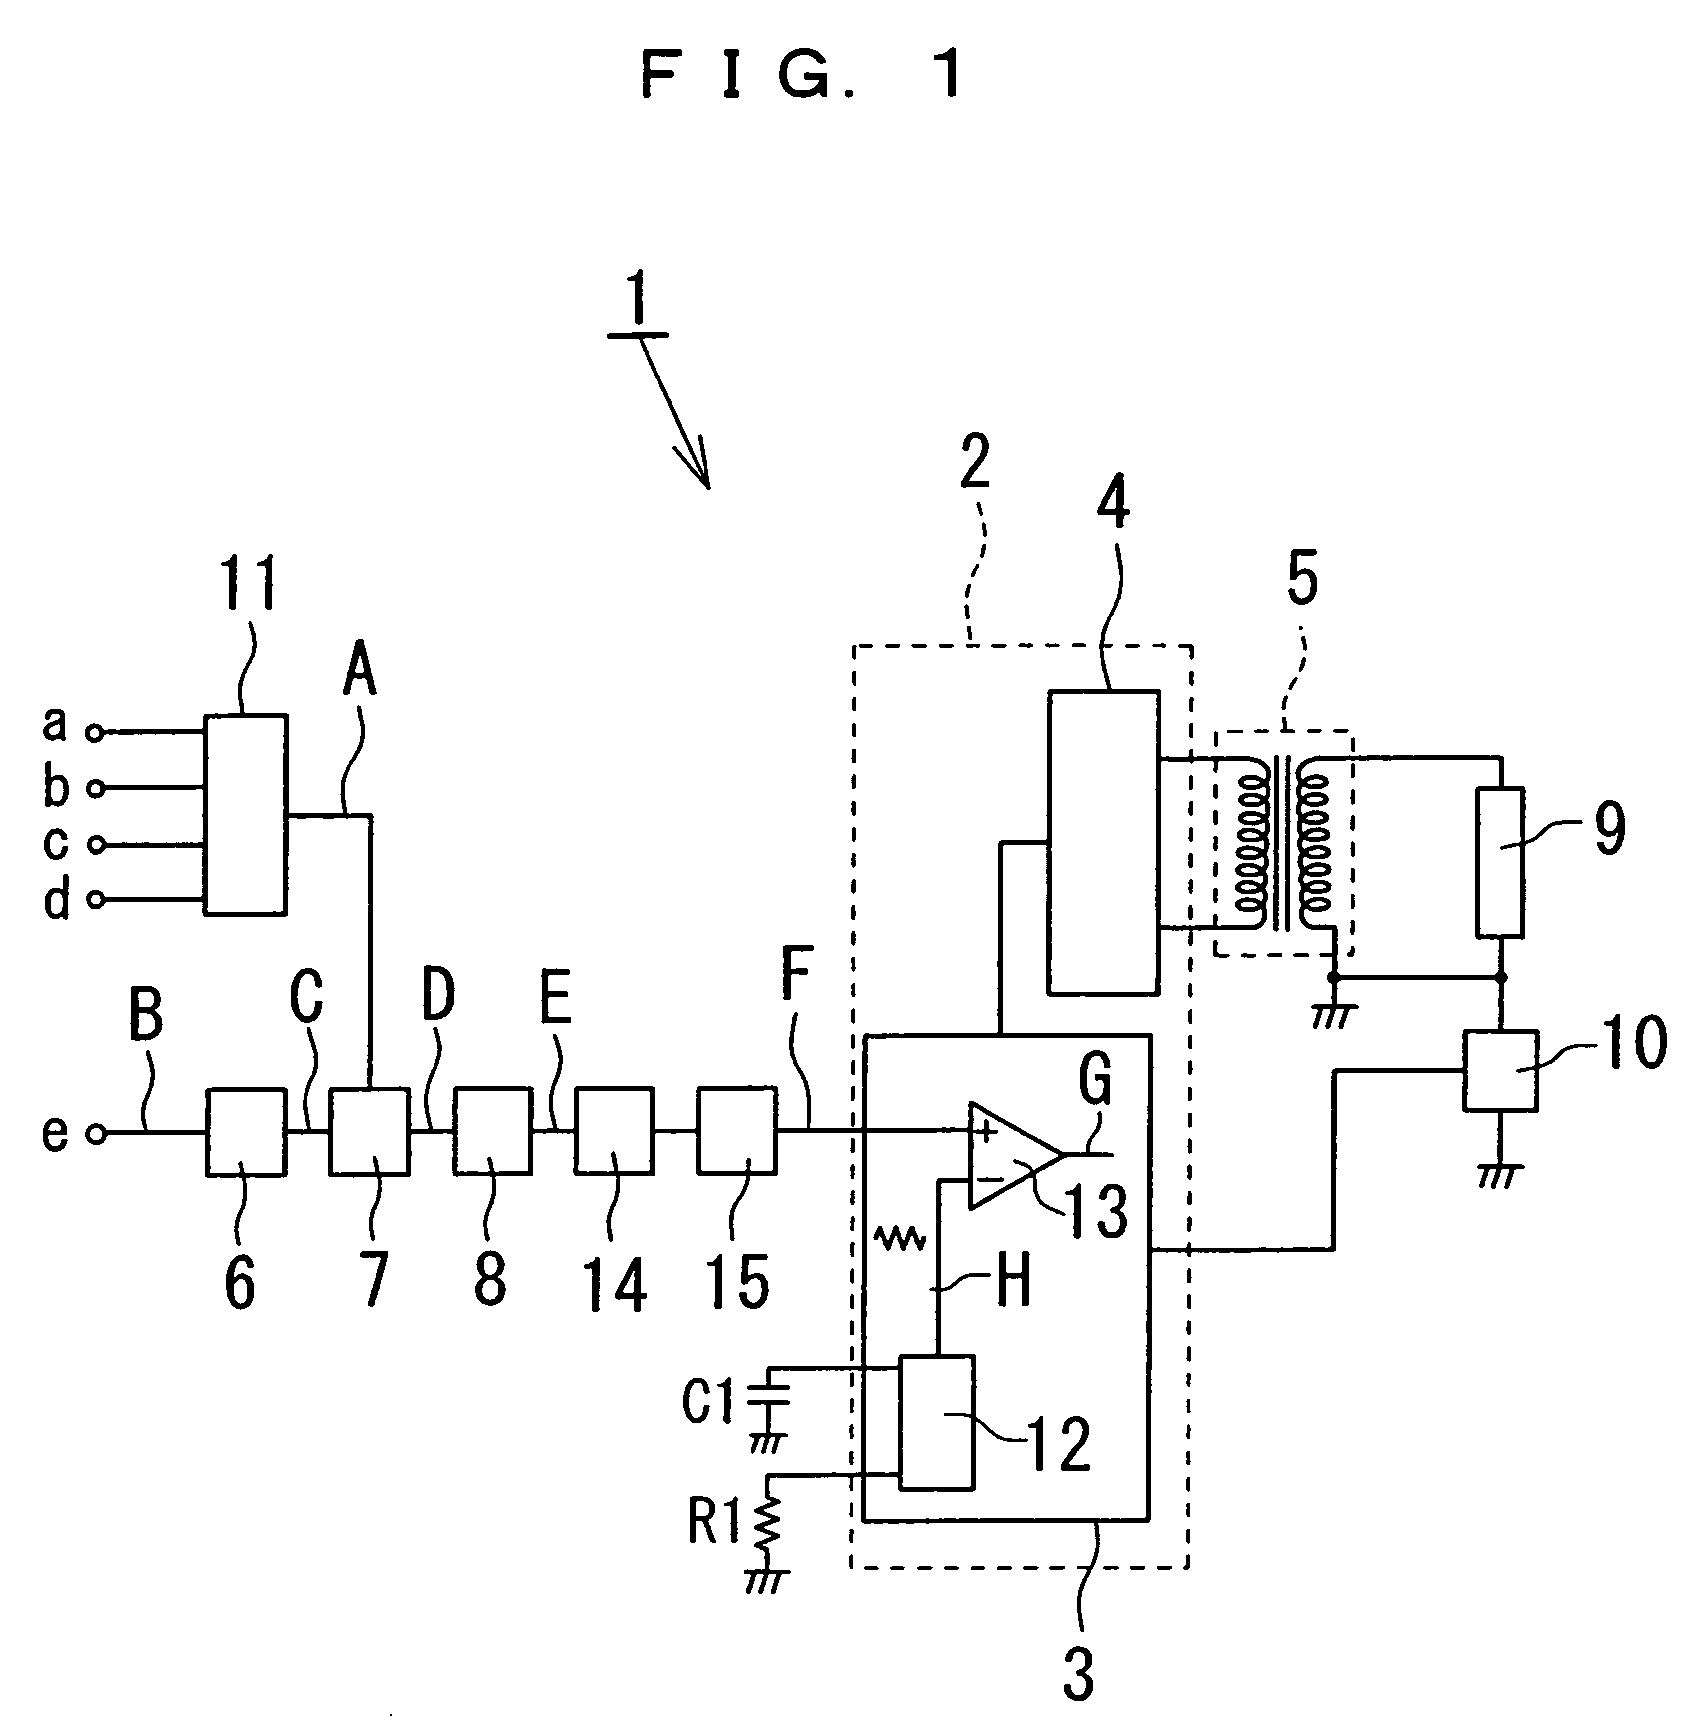 Dimmer circuit for a discharge lighting apparatus